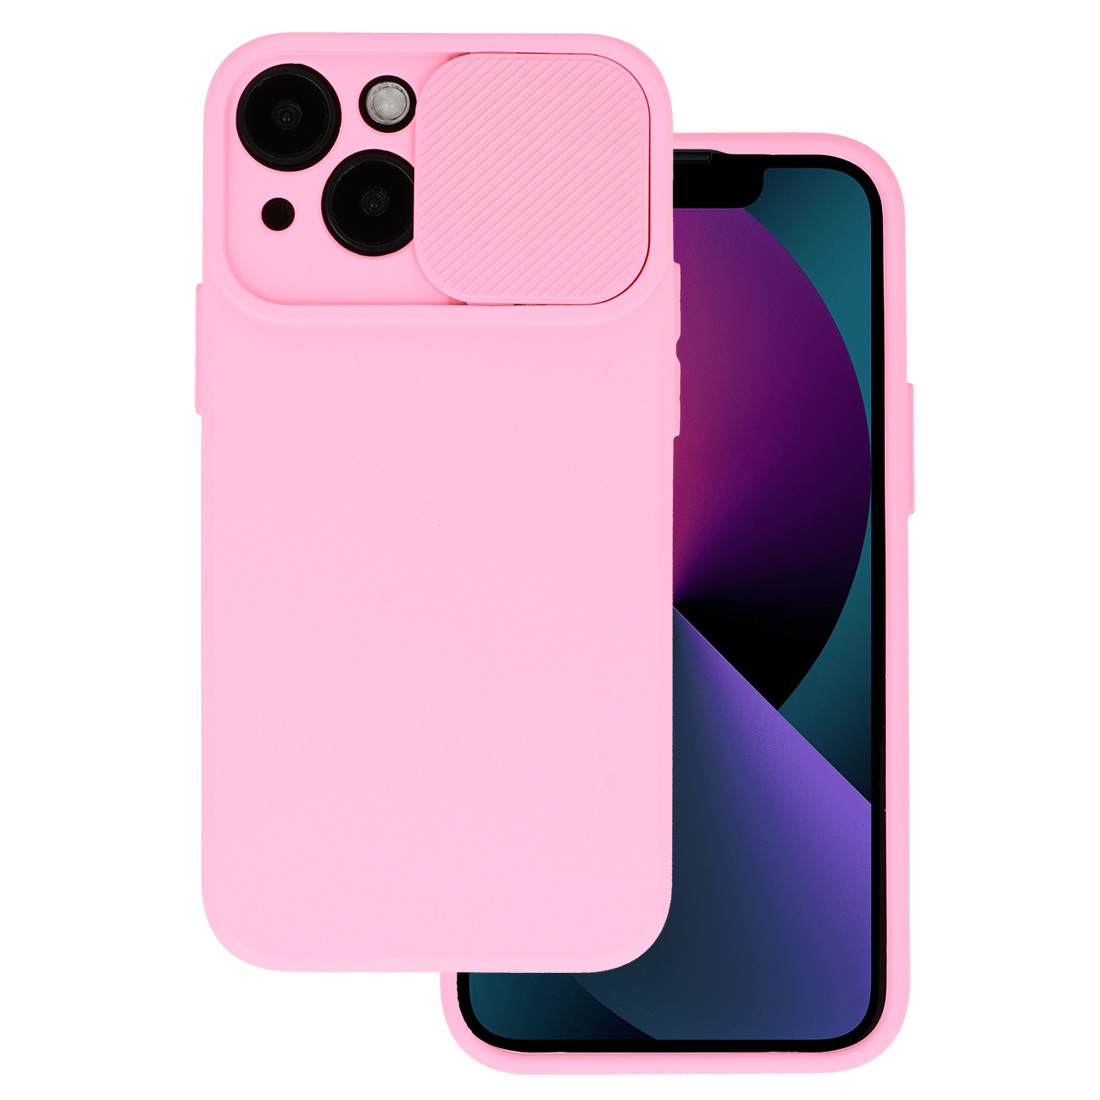 Samsung Galaxy A12 (SM-A125F/DSN) Case Cover with Camshield, Pink | Чехол Бампер Кабура для...